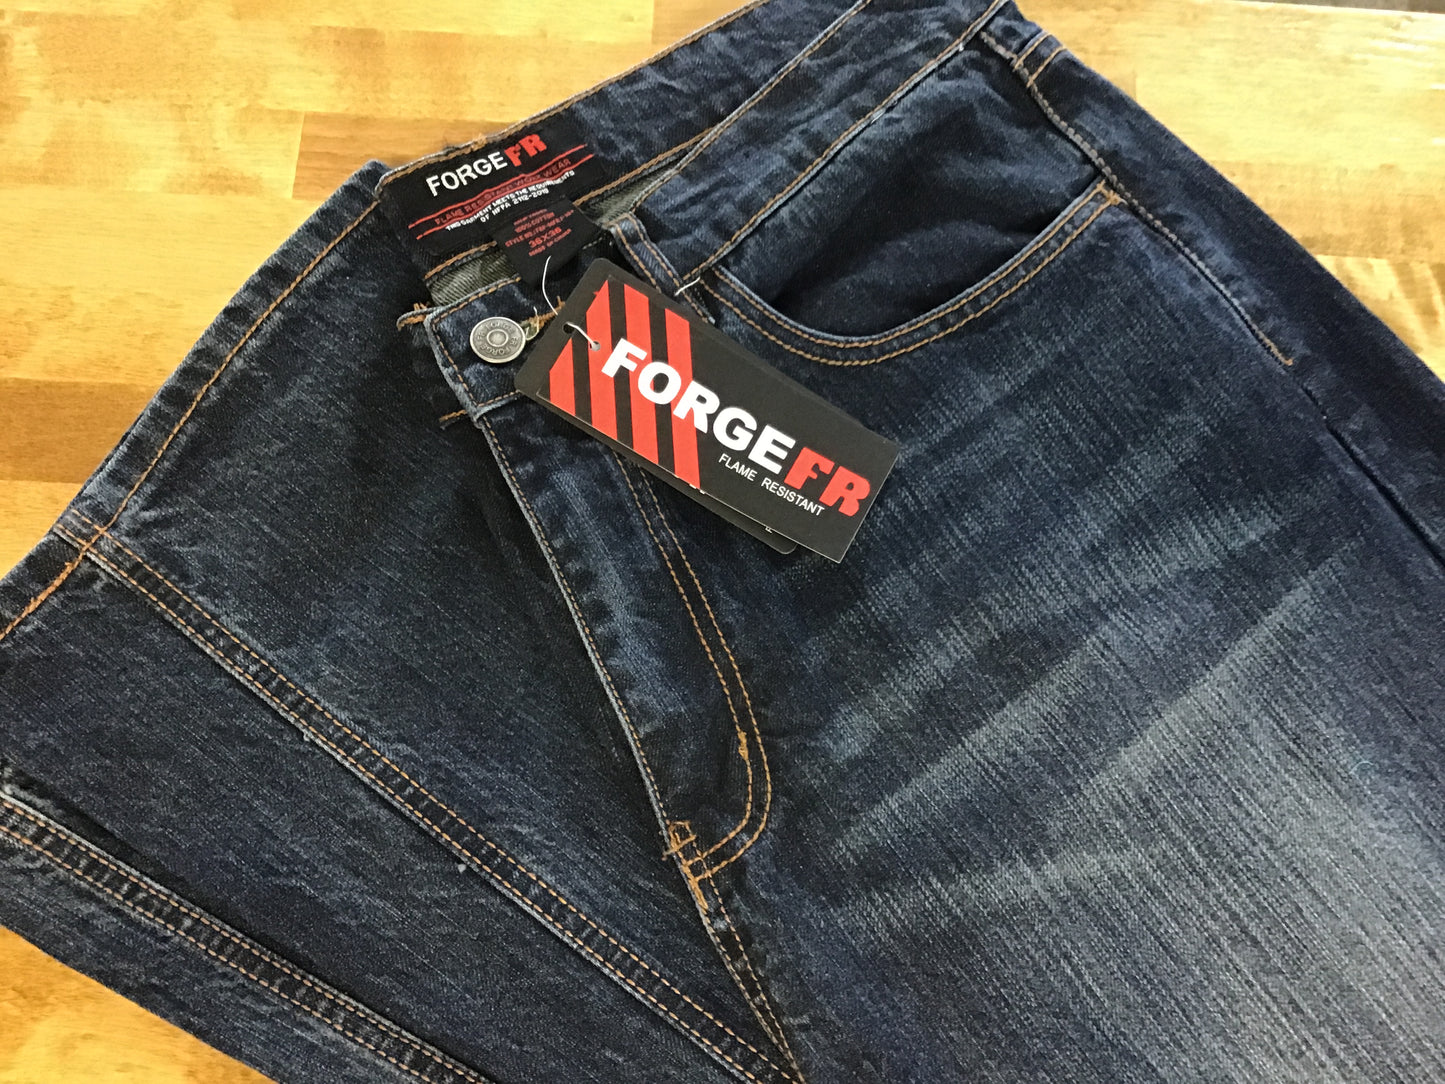 Forge FR Jeans